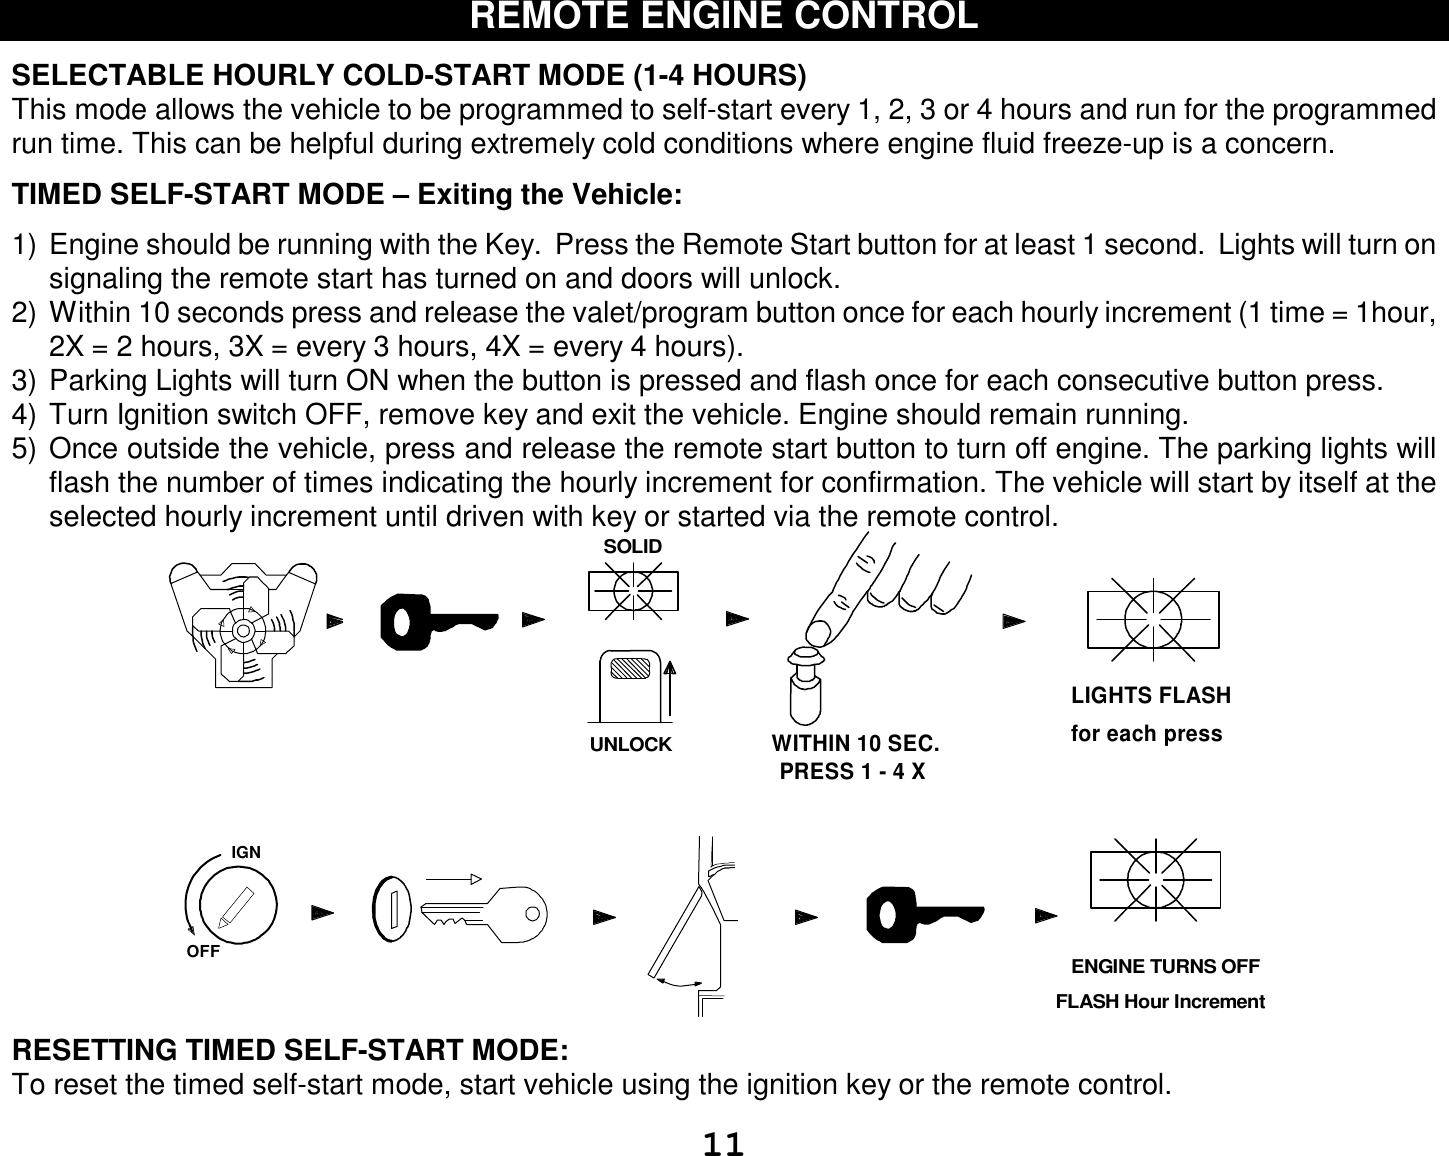  11 REMOTE ENGINE CONTROL  SELECTABLE HOURLY COLD-START MODE (1-4 HOURS) This mode allows the vehicle to be programmed to self-start every 1, 2, 3 or 4 hours and run for the programmed run time. This can be helpful during extremely cold conditions where engine fluid freeze-up is a concern.   TIMED SELF-START MODE – Exiting the Vehicle:  1) Engine should be running with the Key.  Press the Remote Start button for at least 1 second.  Lights will turn on signaling the remote start has turned on and doors will unlock. 2) Within 10 seconds press and release the valet/program button once for each hourly increment (1 time = 1hour, 2X = 2 hours, 3X = every 3 hours, 4X = every 4 hours).  3) Parking Lights will turn ON when the button is pressed and flash once for each consecutive button press. 4) Turn Ignition switch OFF, remove key and exit the vehicle. Engine should remain running. 5) Once outside the vehicle, press and release the remote start button to turn off engine. The parking lights will flash the number of times indicating the hourly increment for confirmation. The vehicle will start by itself at the selected hourly increment until driven with key or started via the remote control. IGNSOLIDOFFUNLOCKPRESS 1 - 4 XWITHIN 10 SEC.LIGHTS FLASH for each press   ENGINE TURNS OFFFLASH Hour Increment RESETTING TIMED SELF-START MODE: To reset the timed self-start mode, start vehicle using the ignition key or the remote control. 